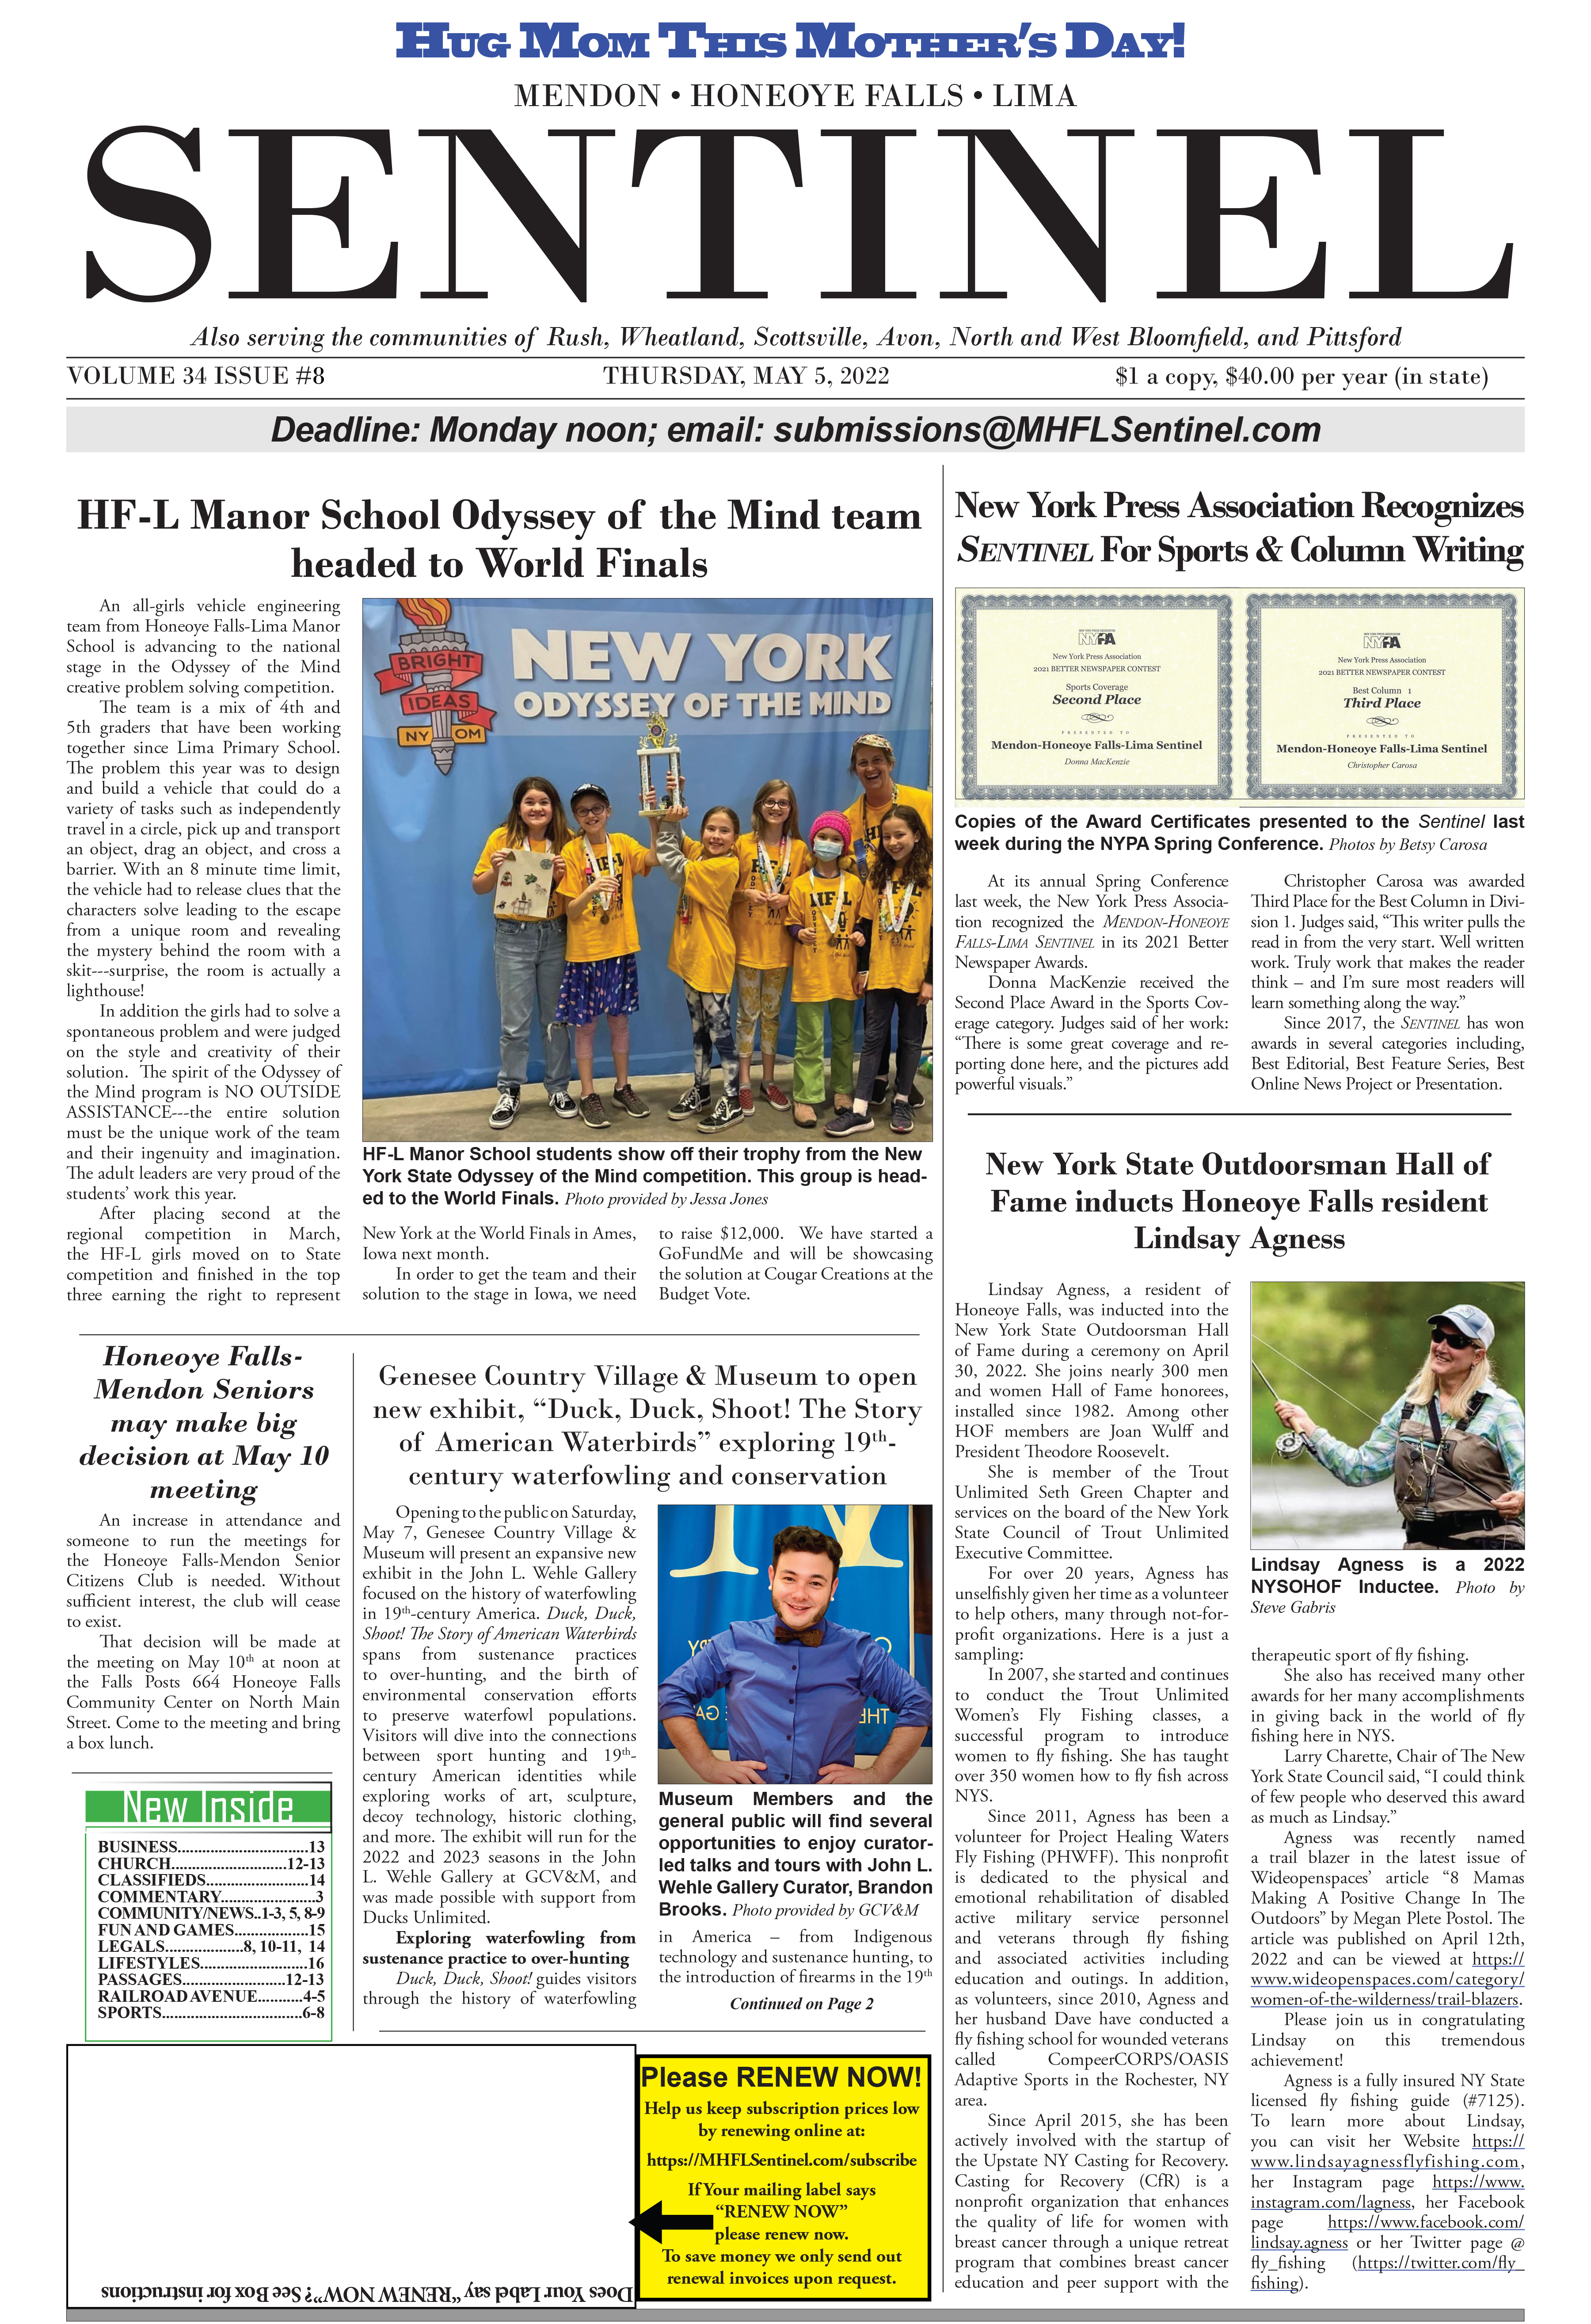 May 5, 2022 Issue of <em>The Sentinel</em>